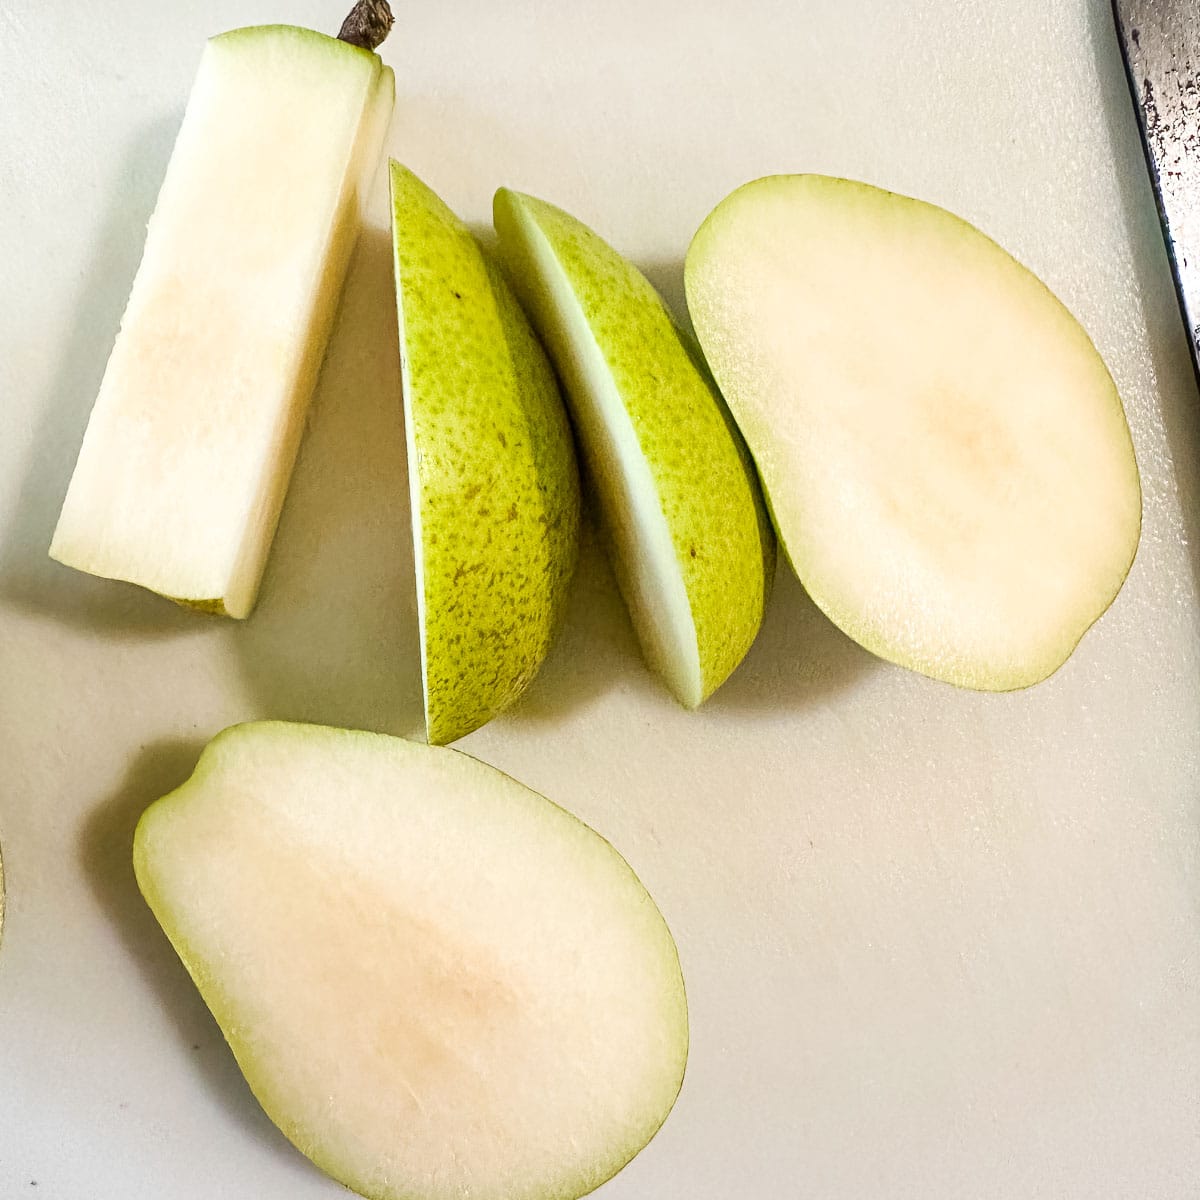 Sliced pears on a white cutting board.